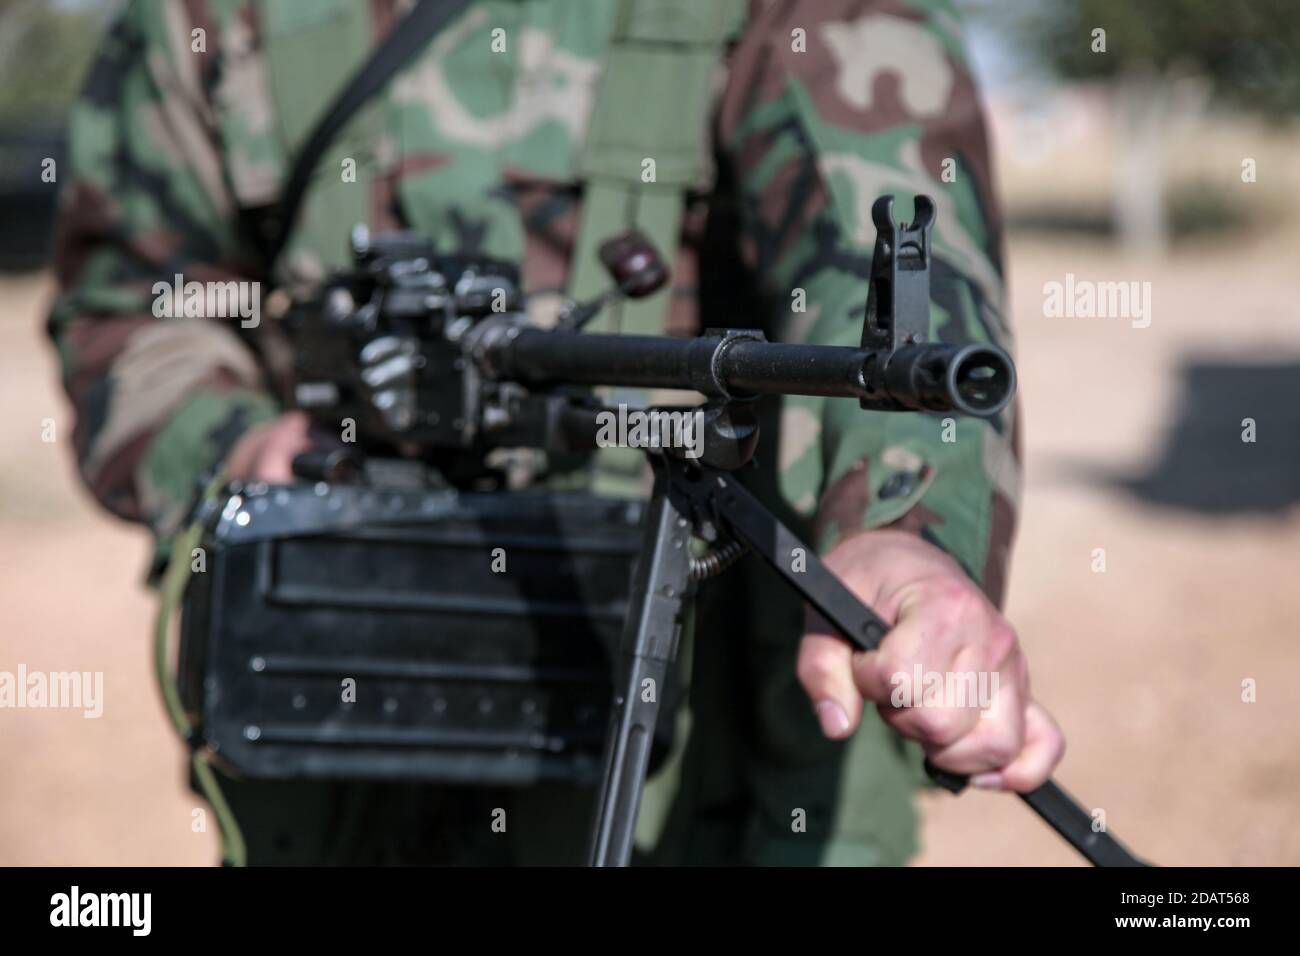 North Homs, Syria - 2017: Soldier Fighter Standing while Holding and Pointing Russian BKC Automatic Machine Gun during Syrian Civil War | Close up Stock Photo